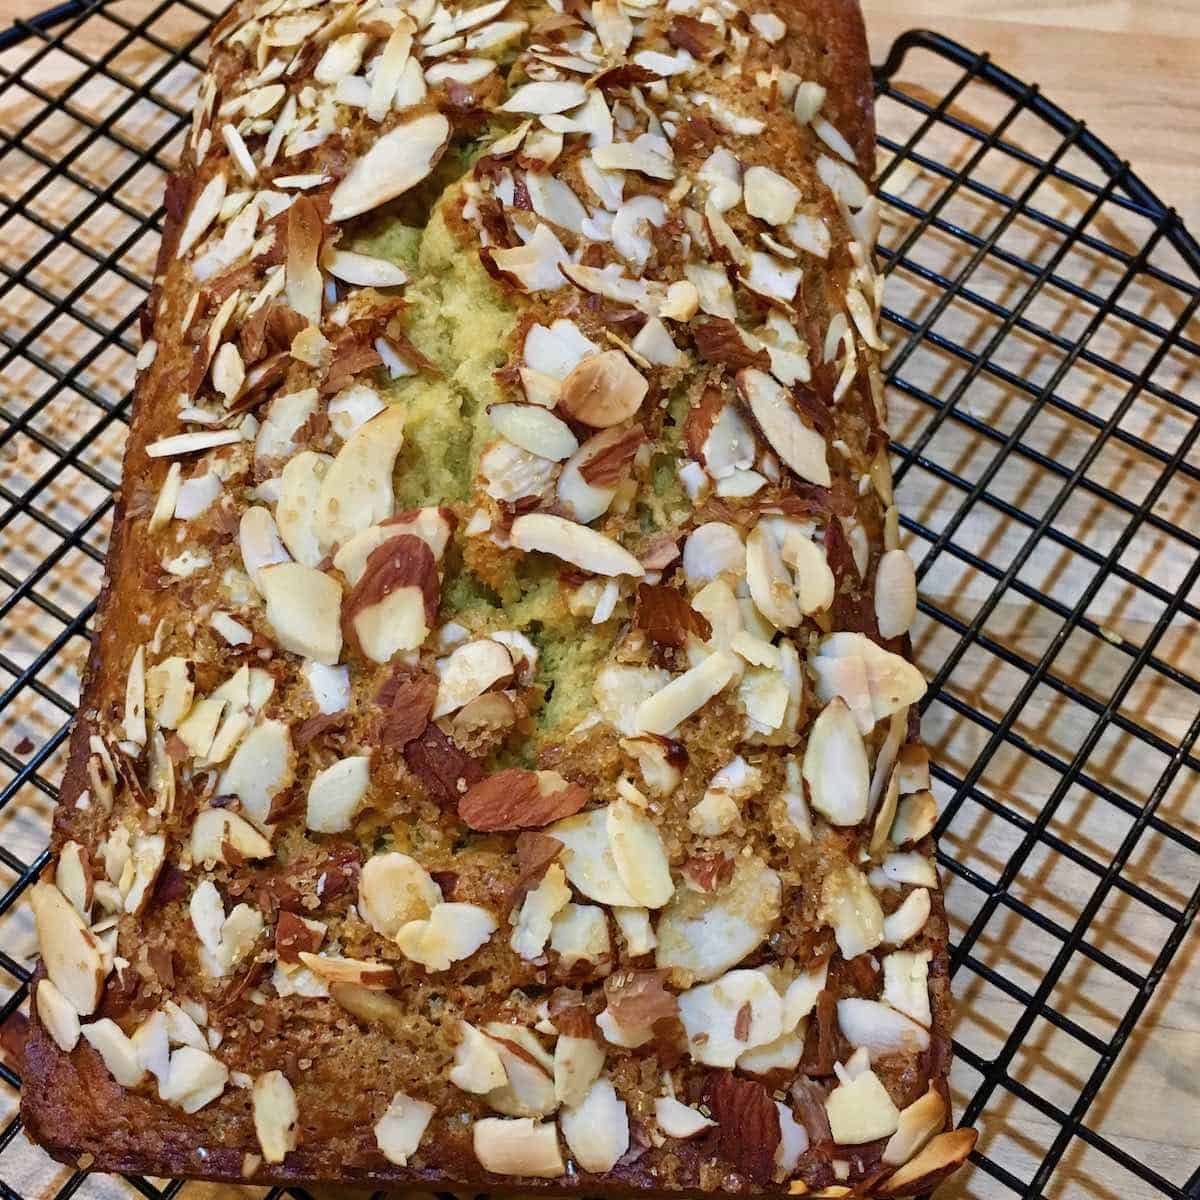 Banana bread topped with almonds on cooling rack.